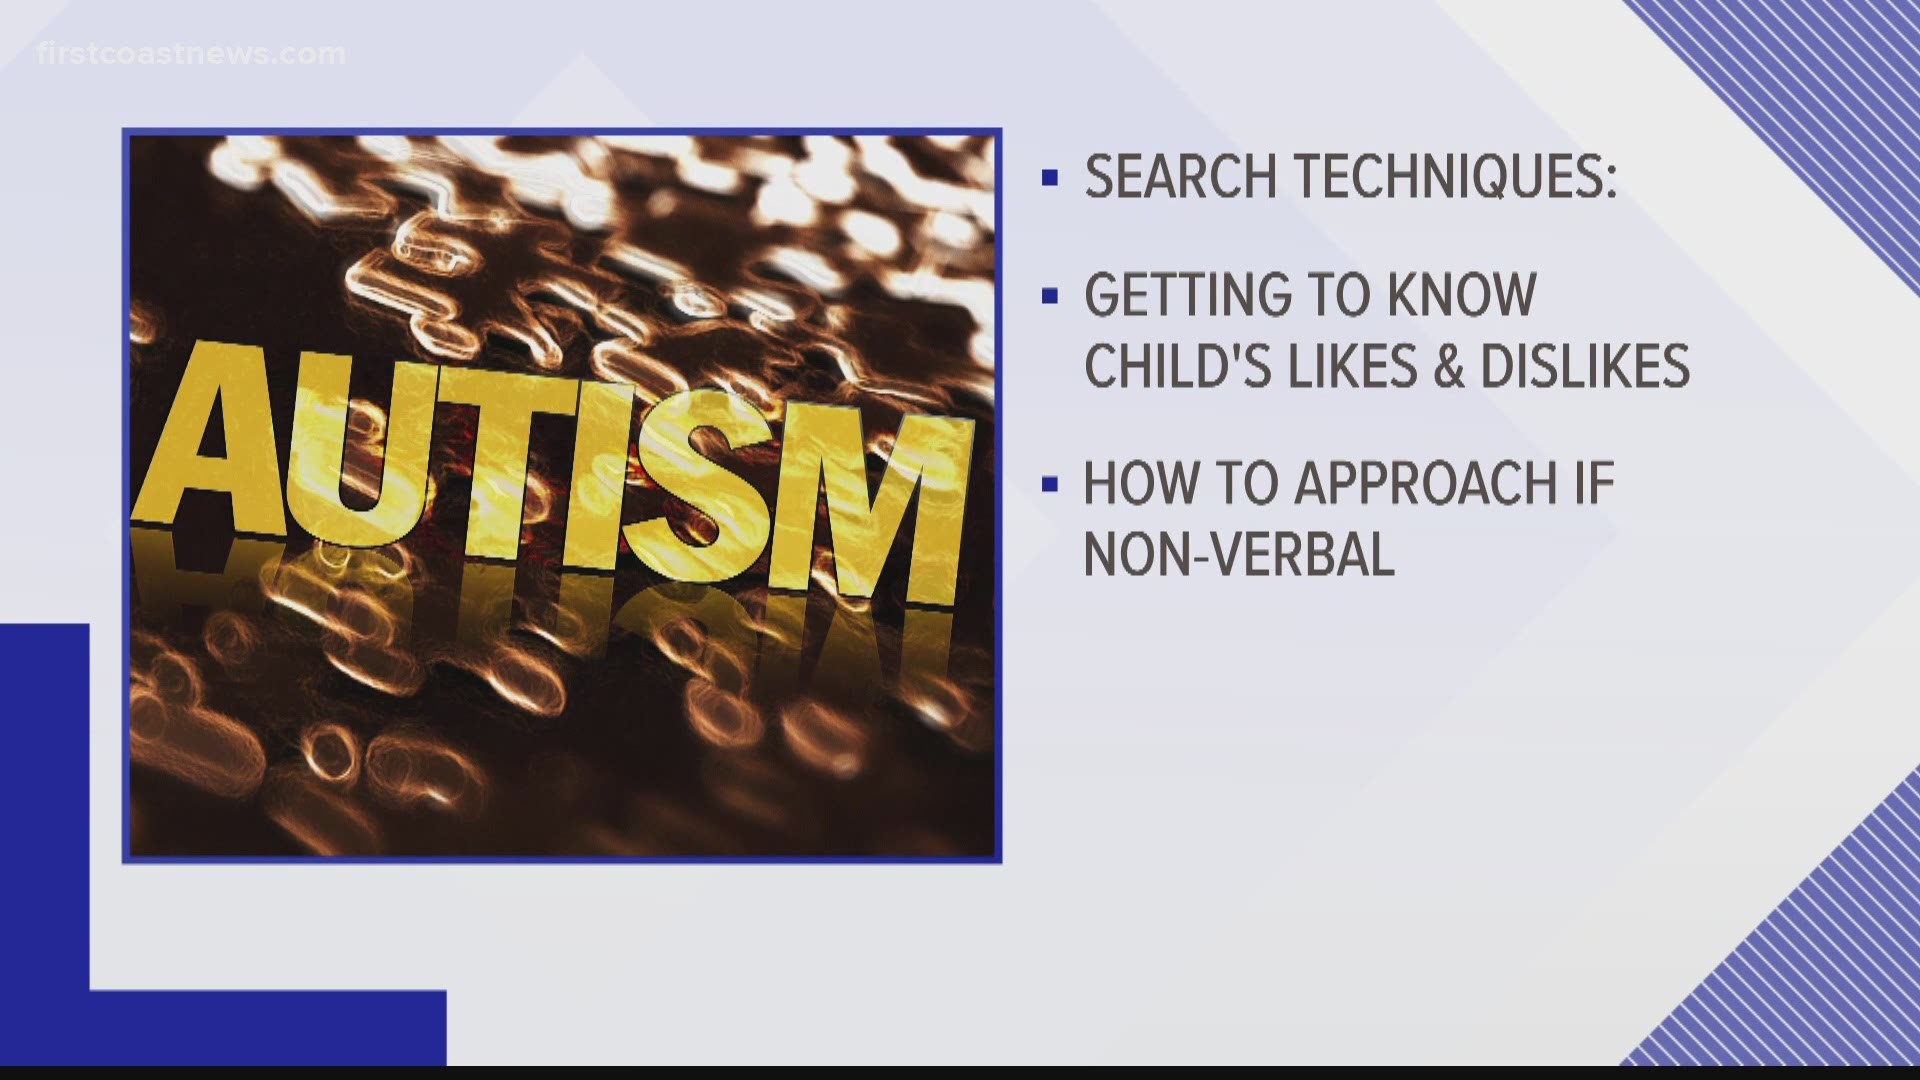 A Jacksonville based company has trained 180 agencies across the country in how to respond to missing person cases involving people with autism.